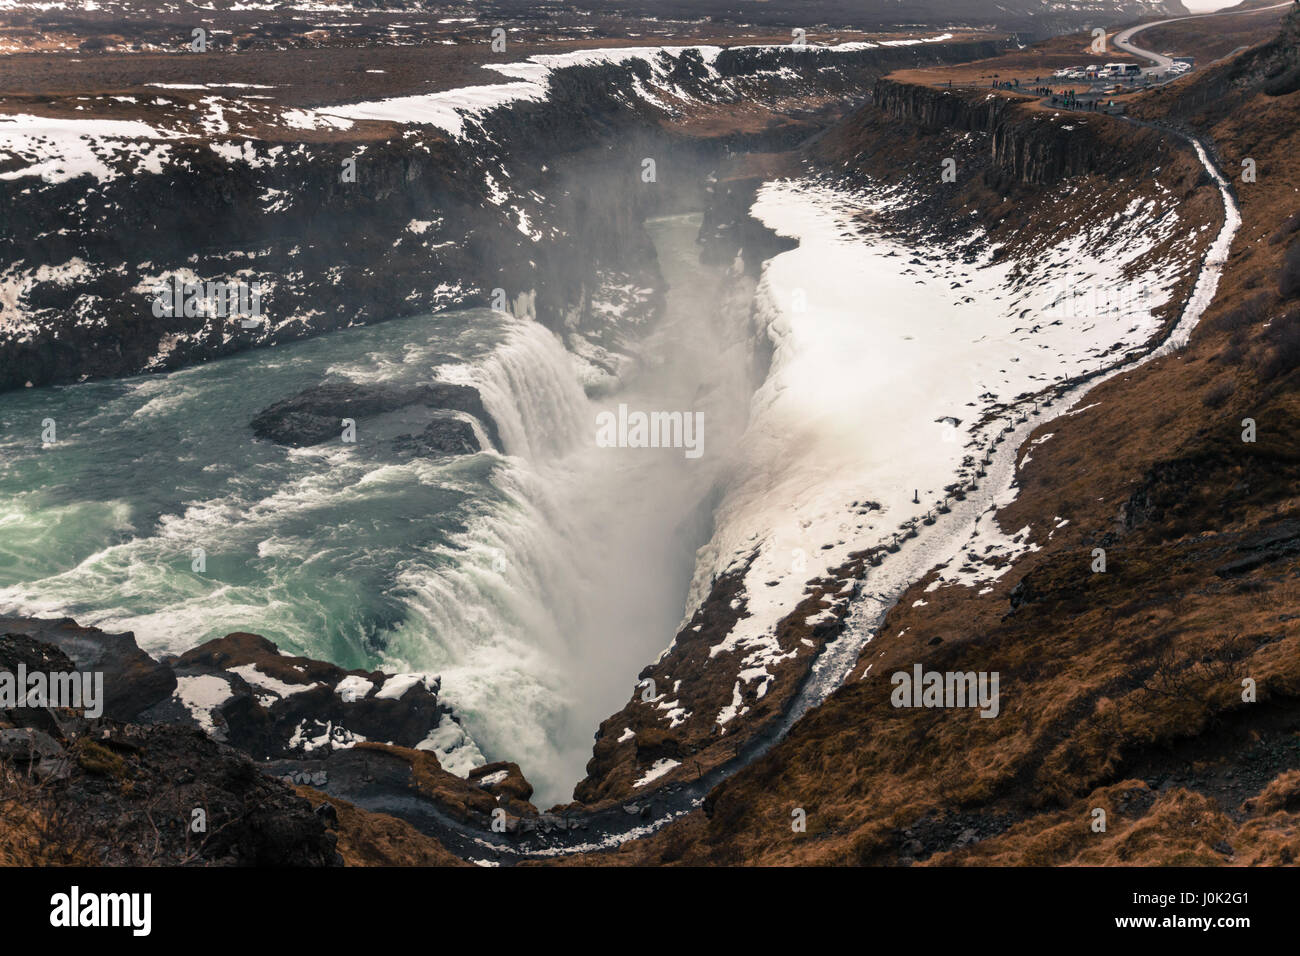 Side view of the iconic Gullfoss waterfall, part of the Golden Circle and one of the most popular natural wonders in Iceland Stock Photo